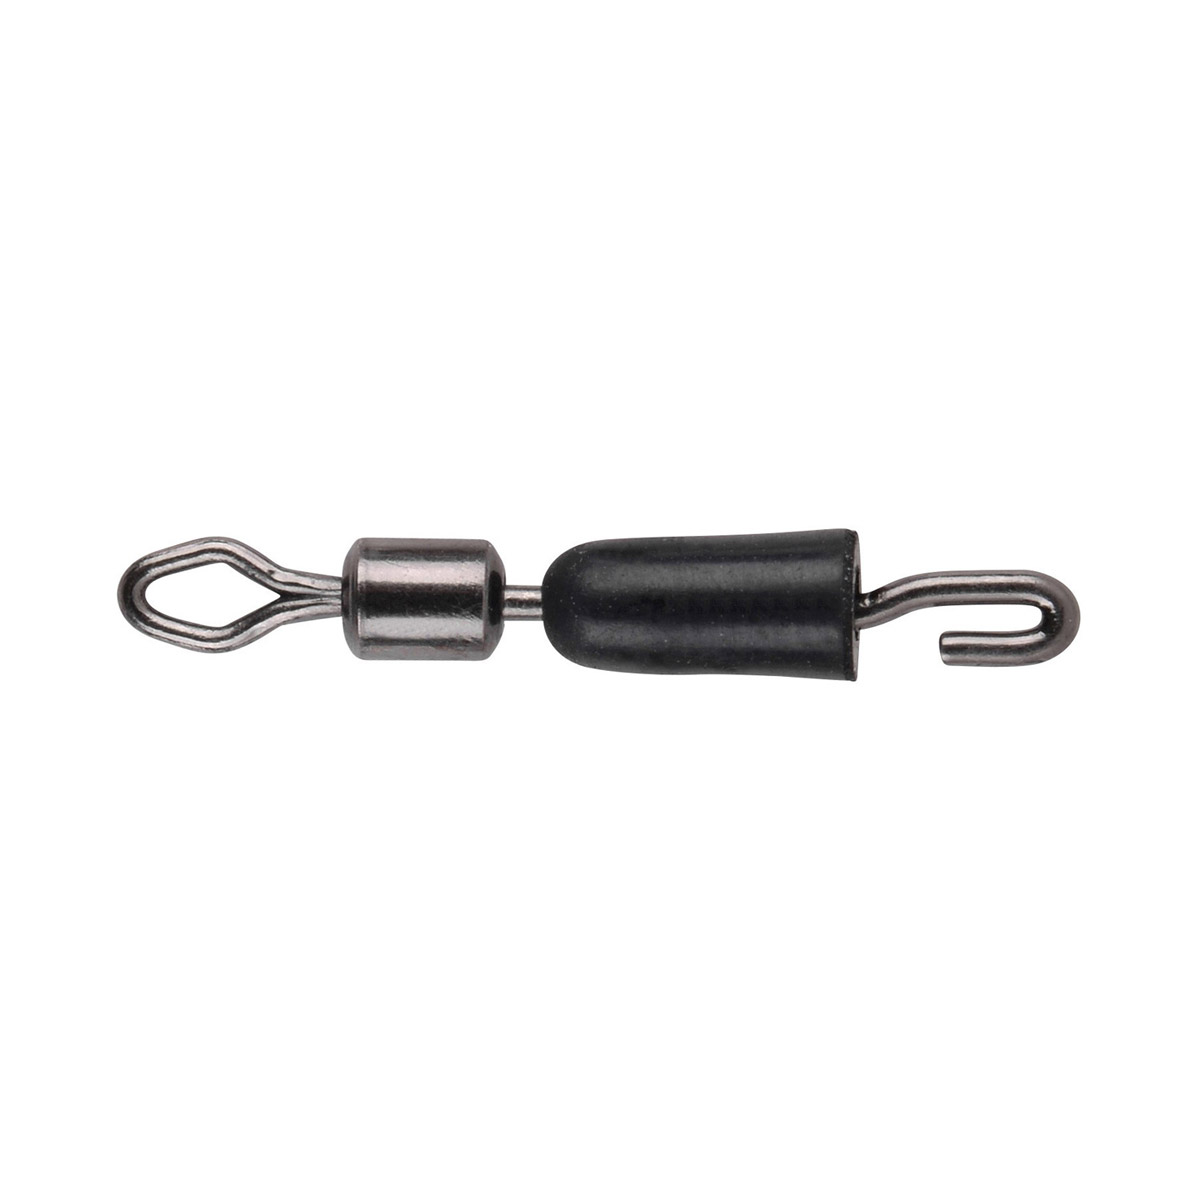 Spro Cresta In Tube Hooklength Connection Swivel